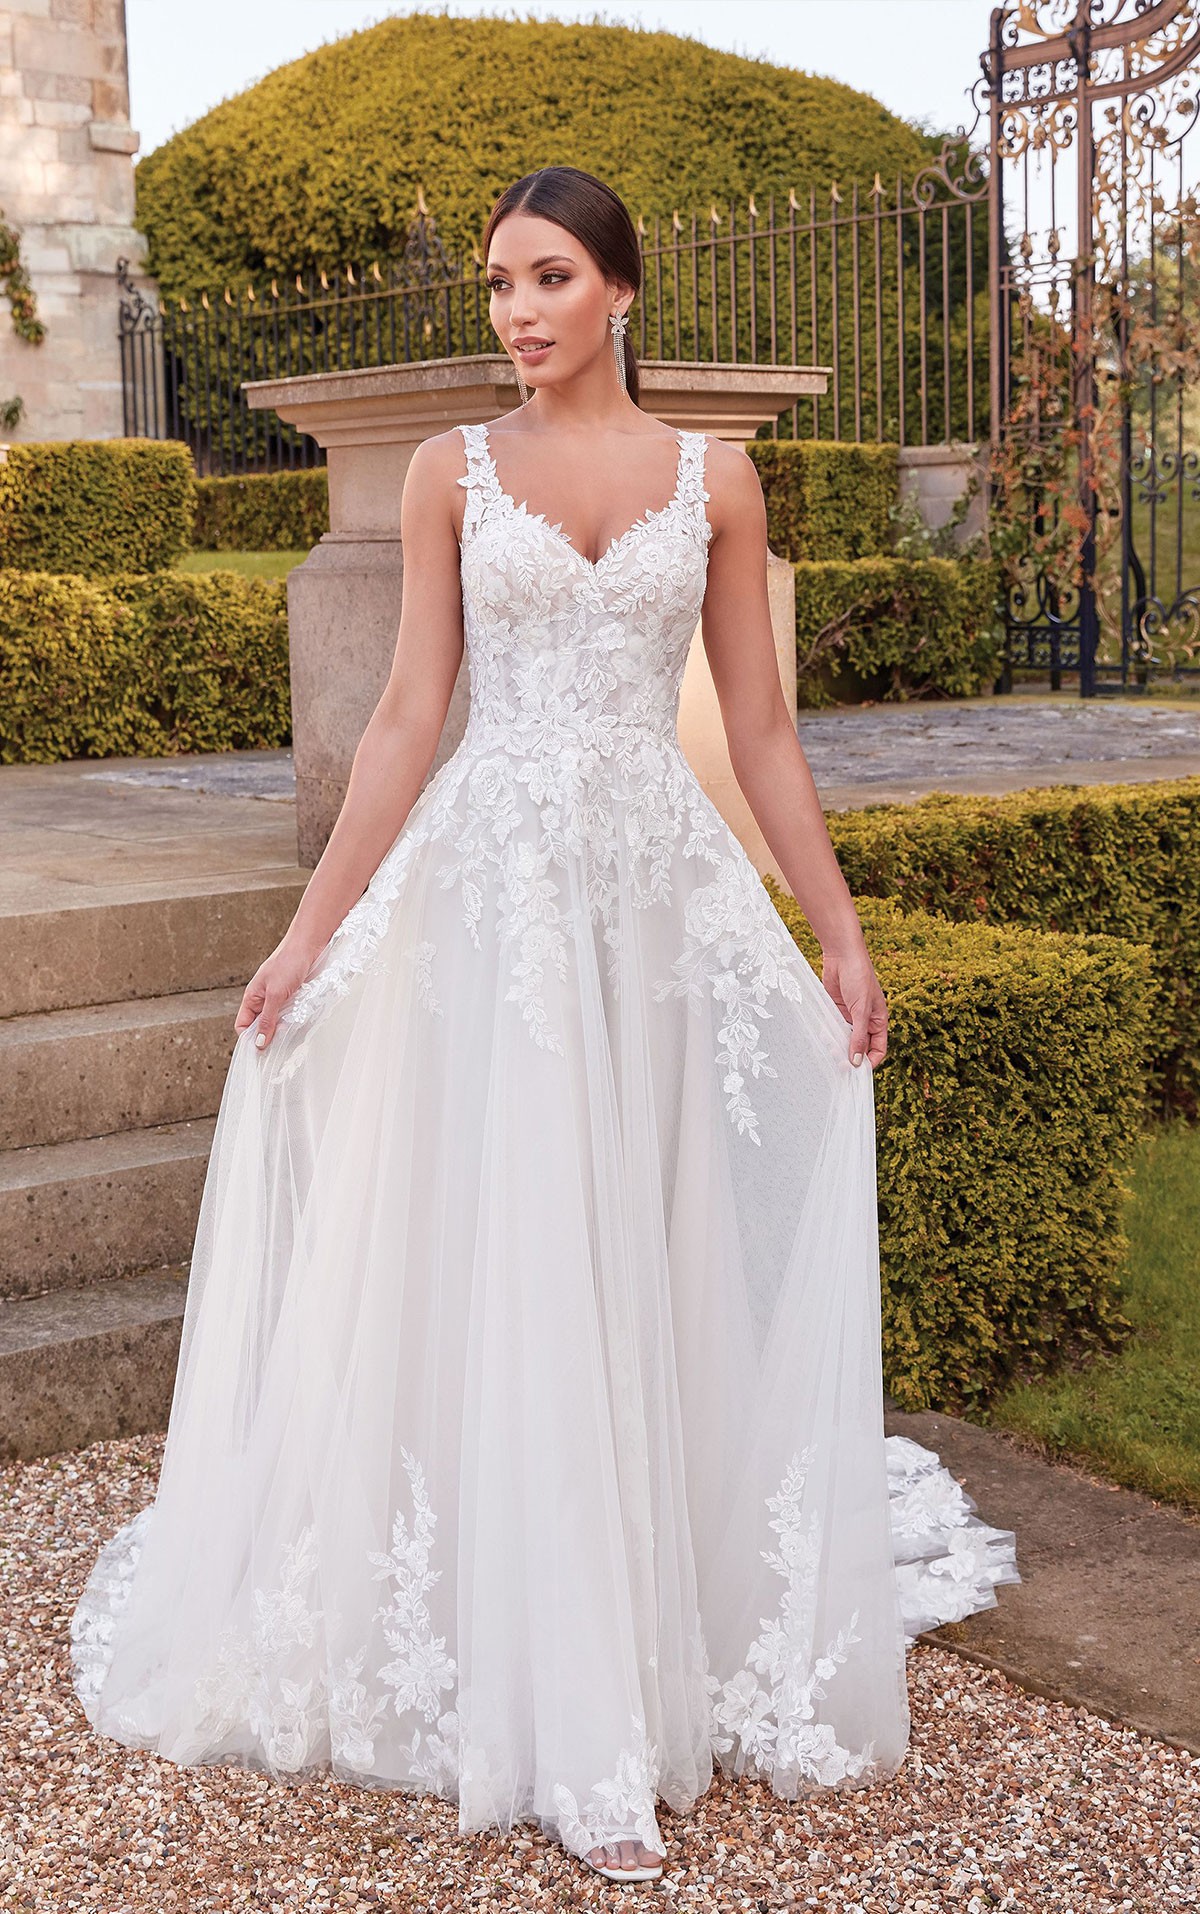 44348 - Helena - Justin Alexander -  Sincerity Bridal Romantic Tulle & Lace Aline dress with detachable sleeves. Romantic and classical bridal designs at Blessings Bridal Shop Loyal Parade, Mill Rise, Westdene, Brighton. East Sussex. BN1 5GG T: 01273 505766 E: info@blessingsbridal.co.uk